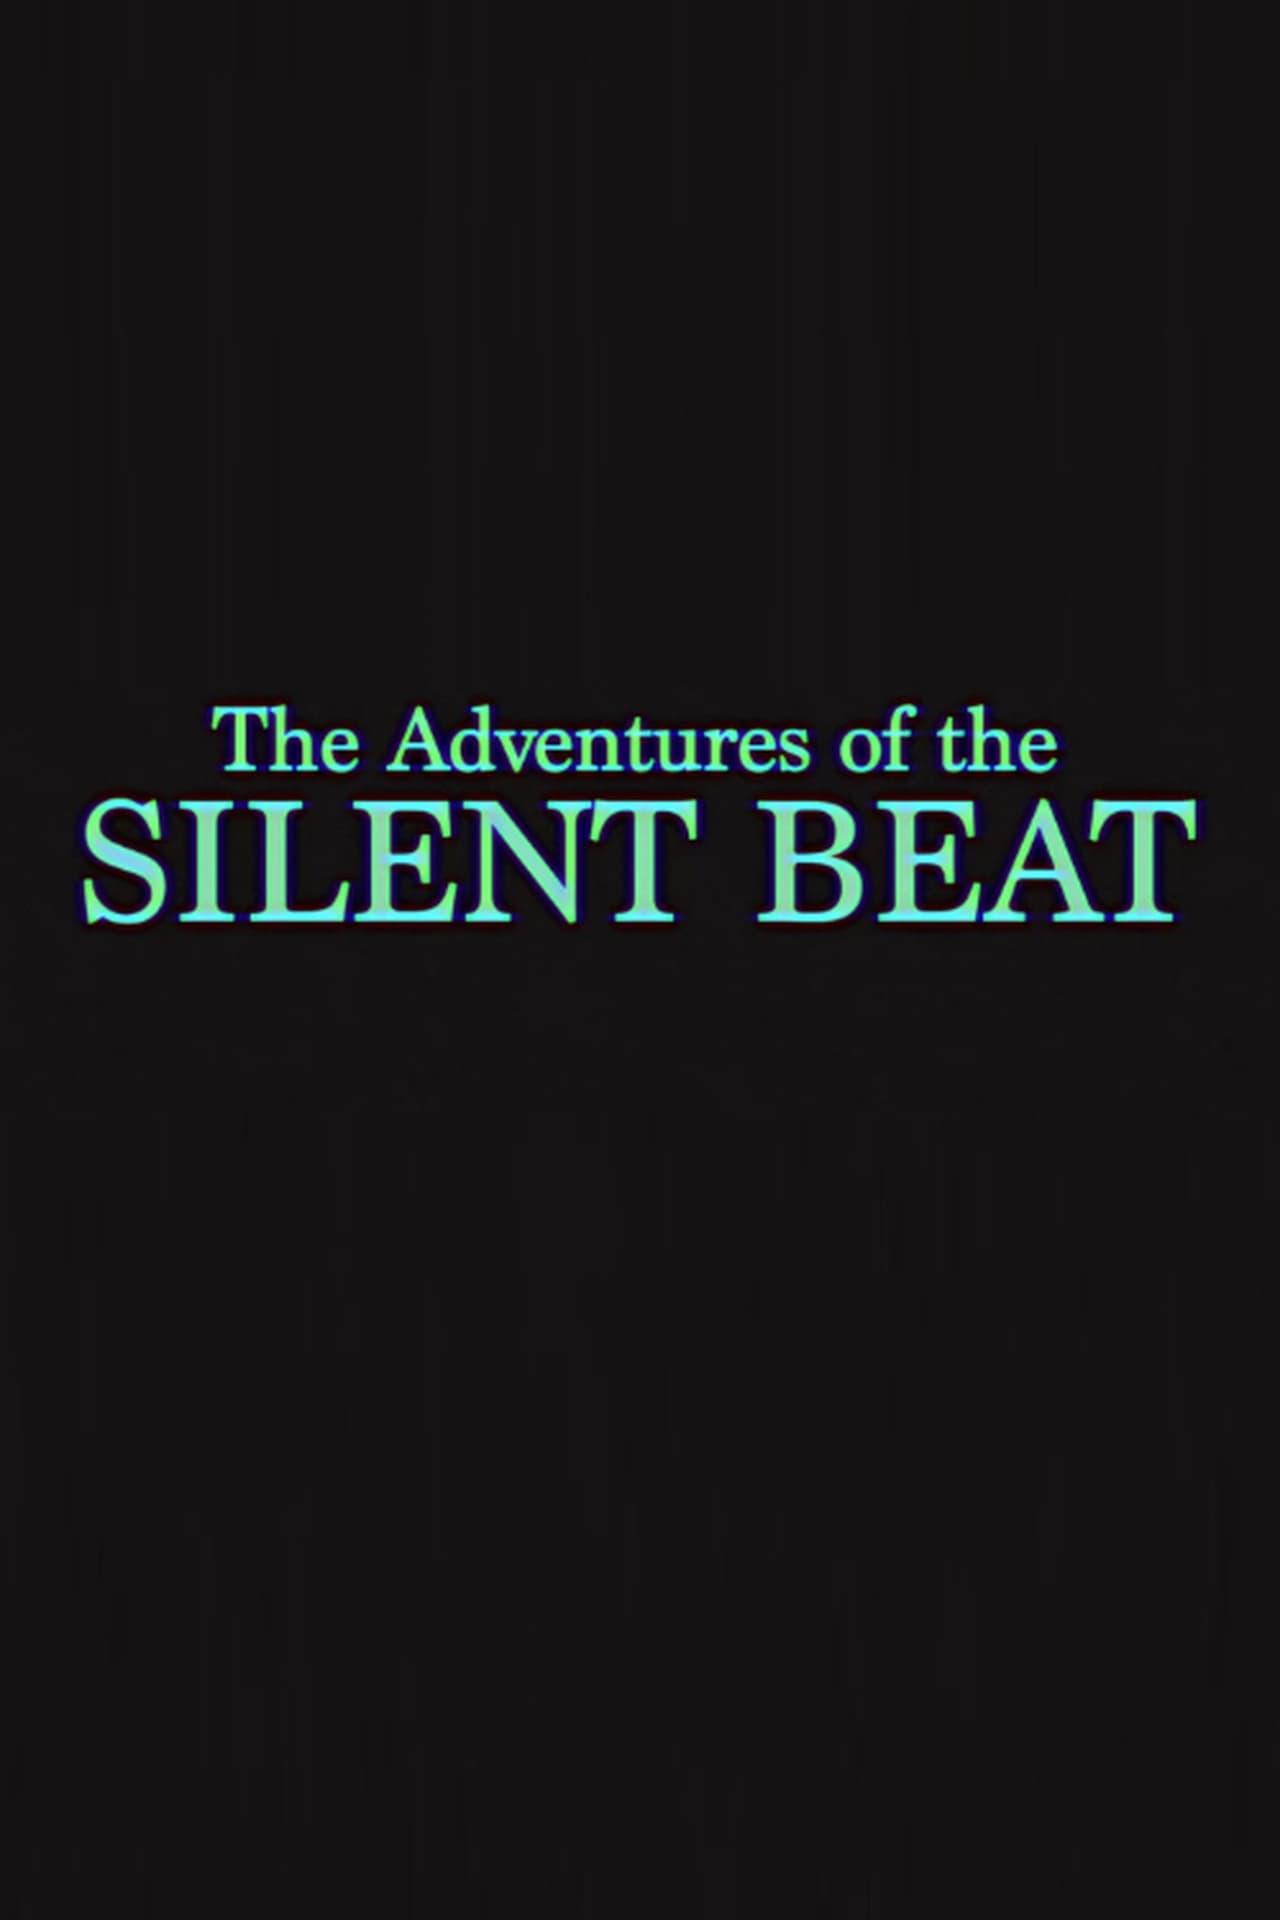 The Adventures of the Silent Beat poster